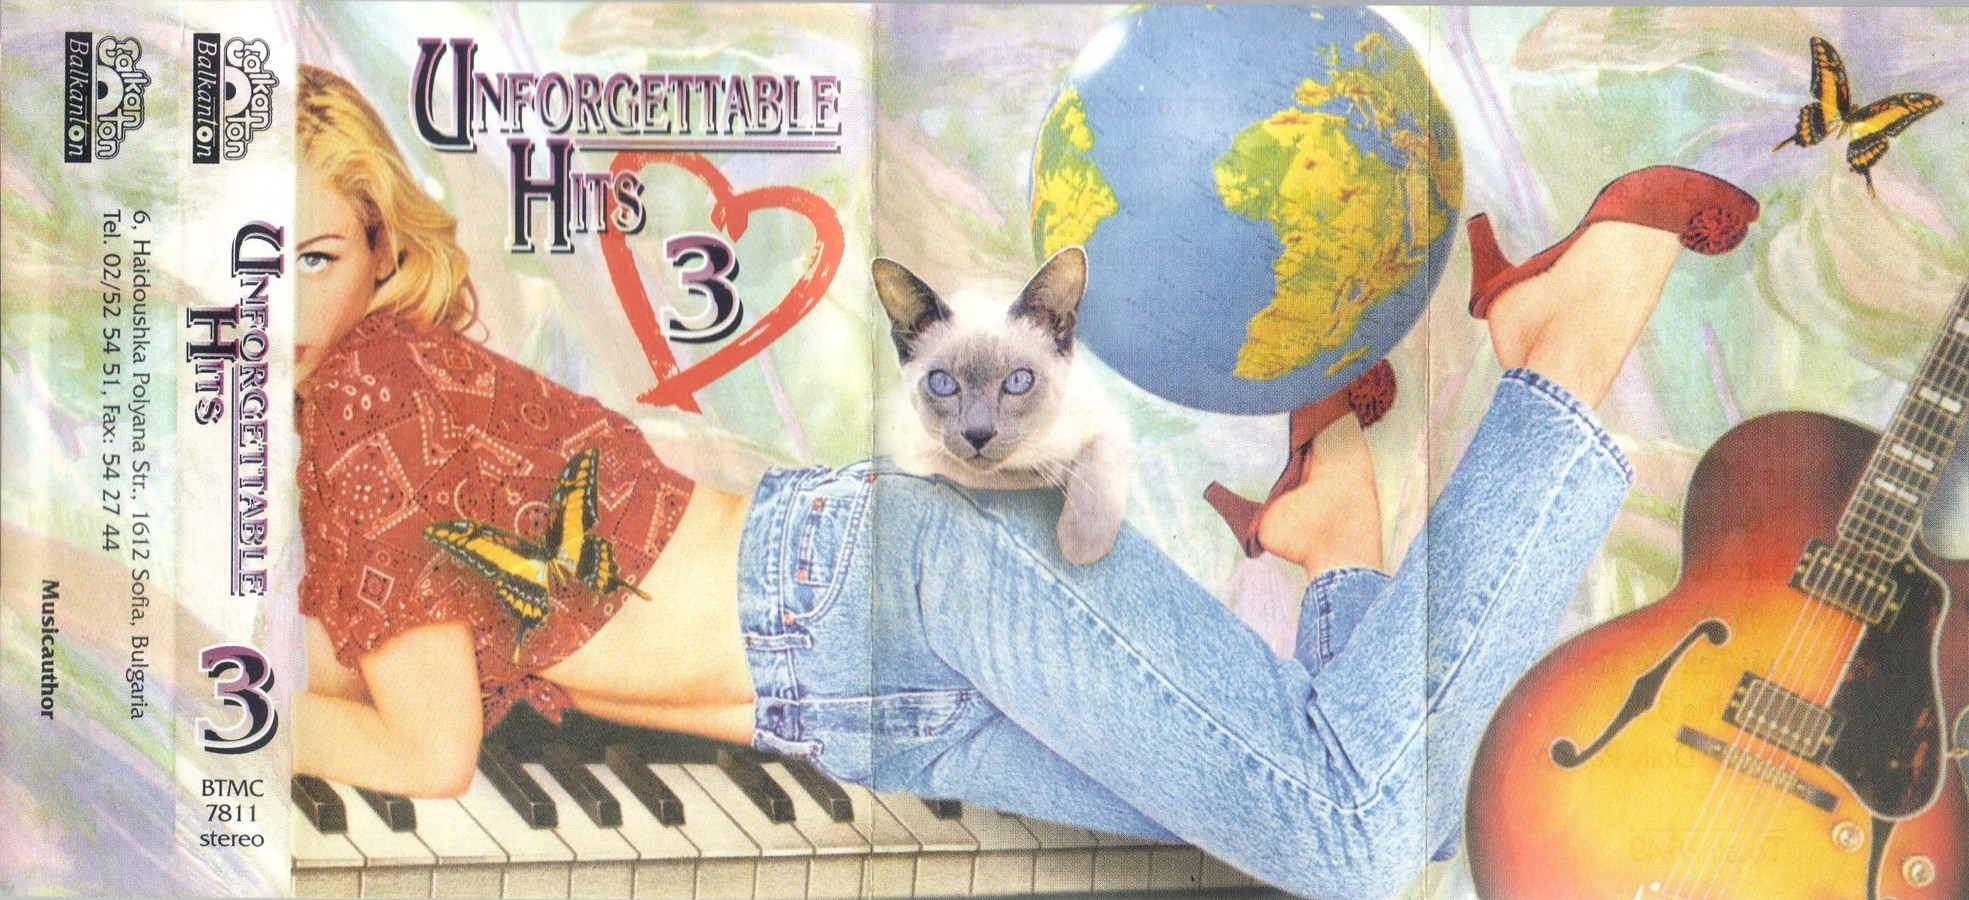 Unforgettable hits - 3